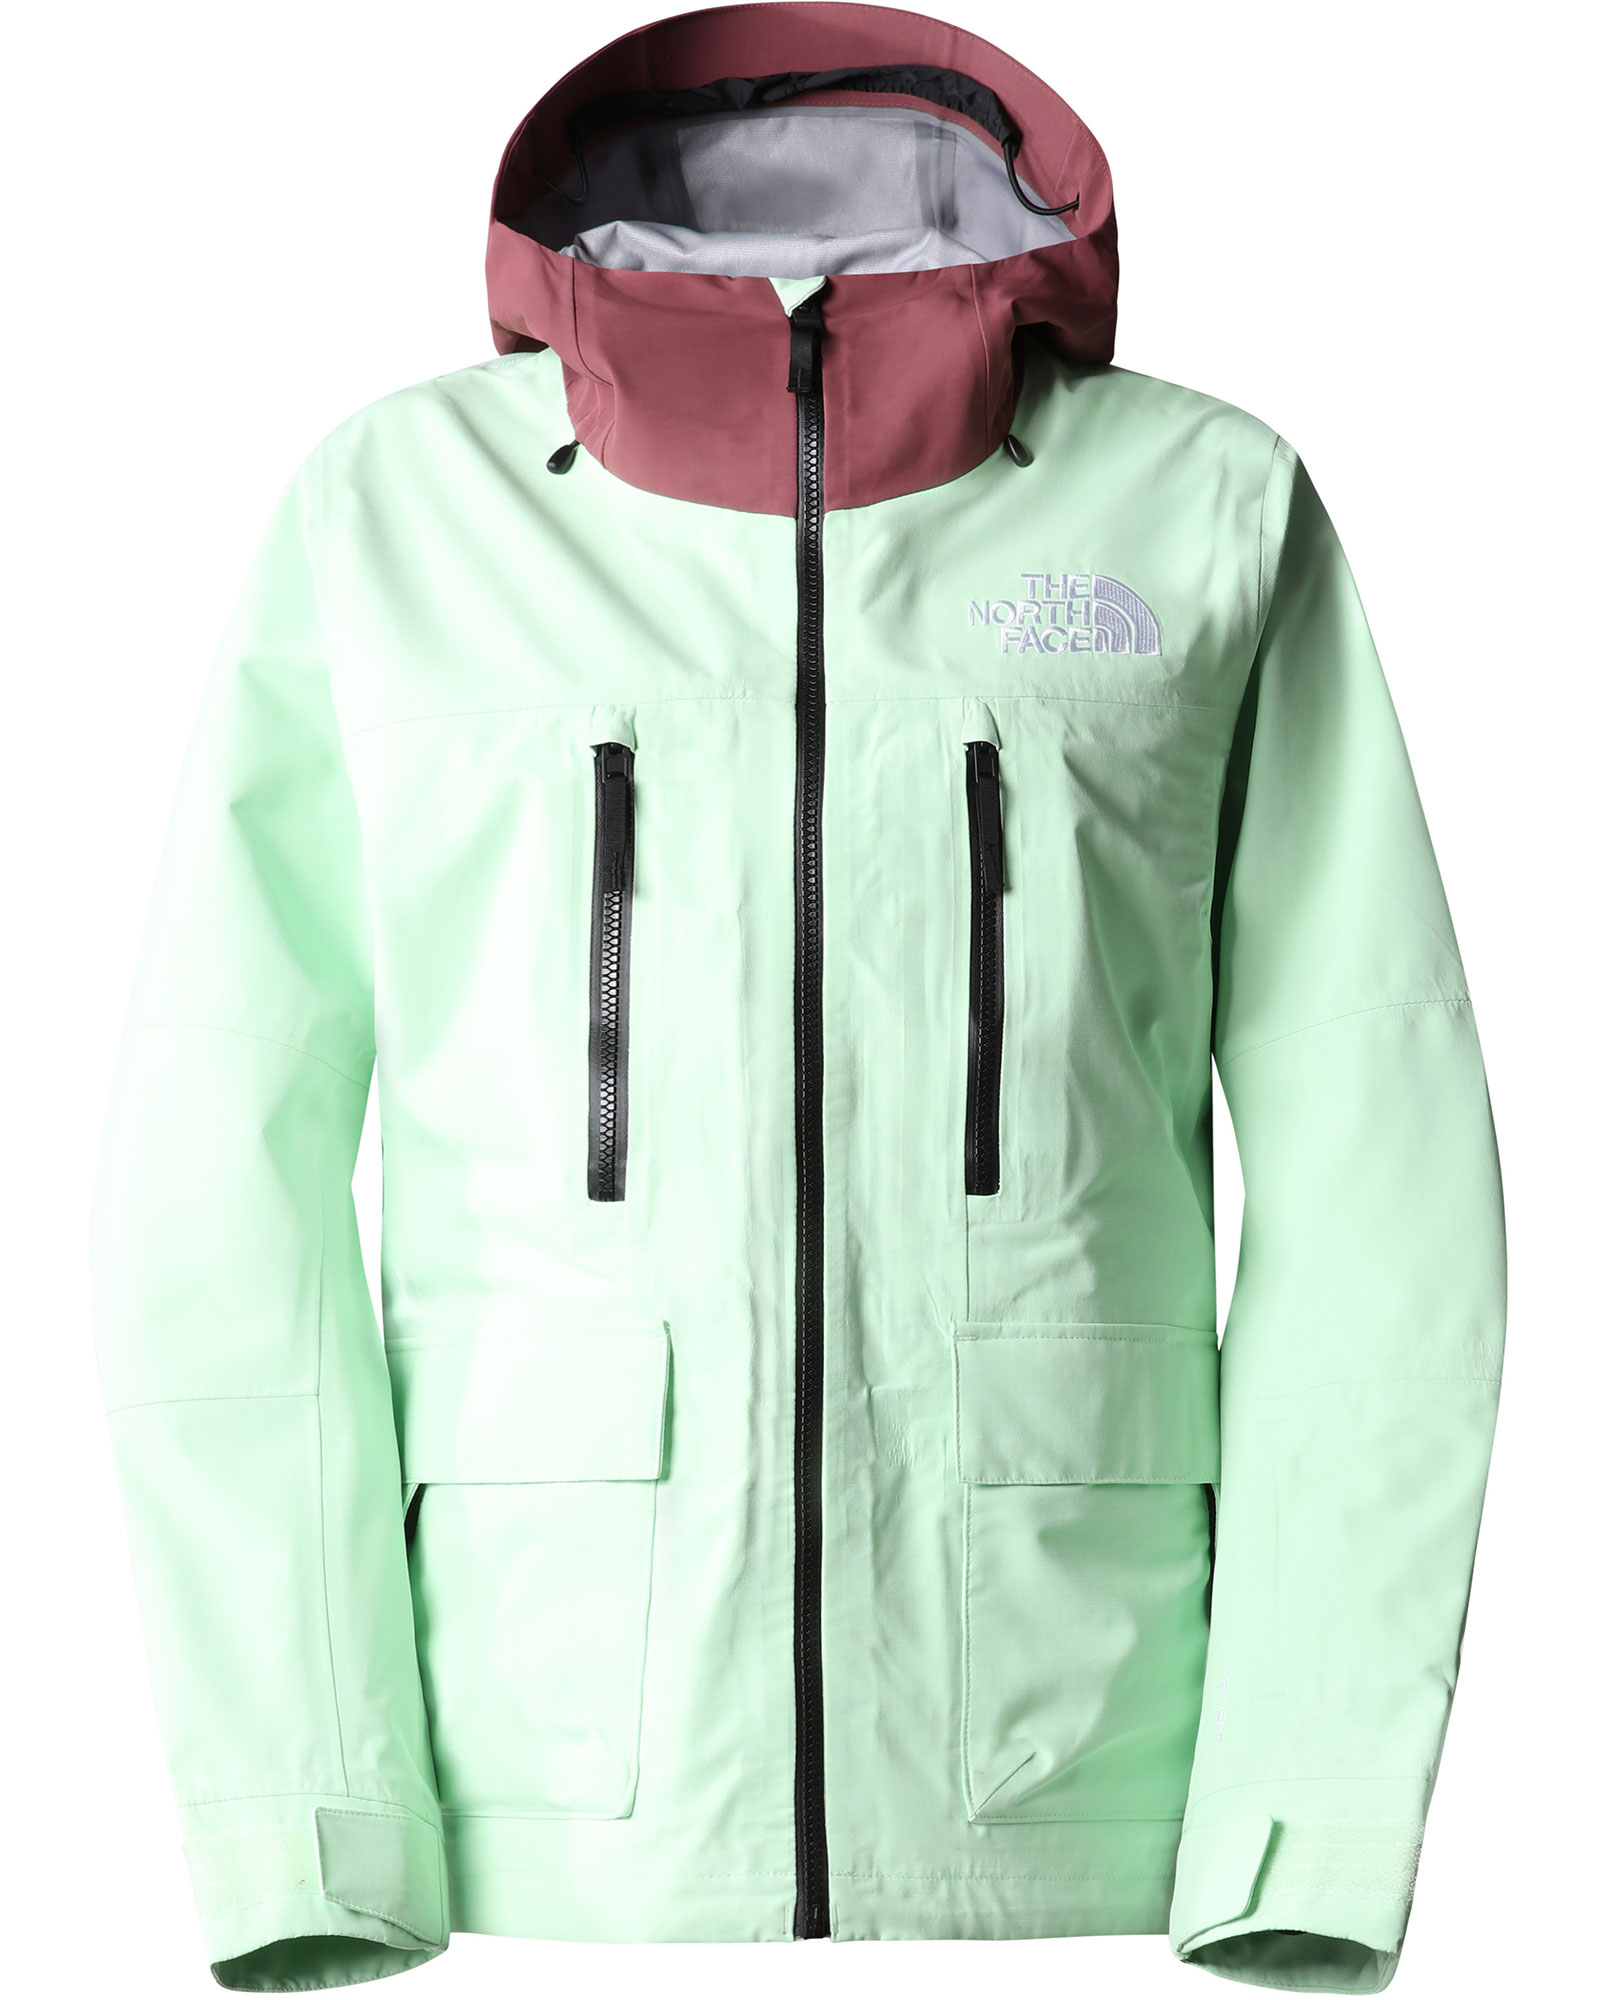 The North Face Dragline Women’s Jacket - Patina Green/Wild Ginger S